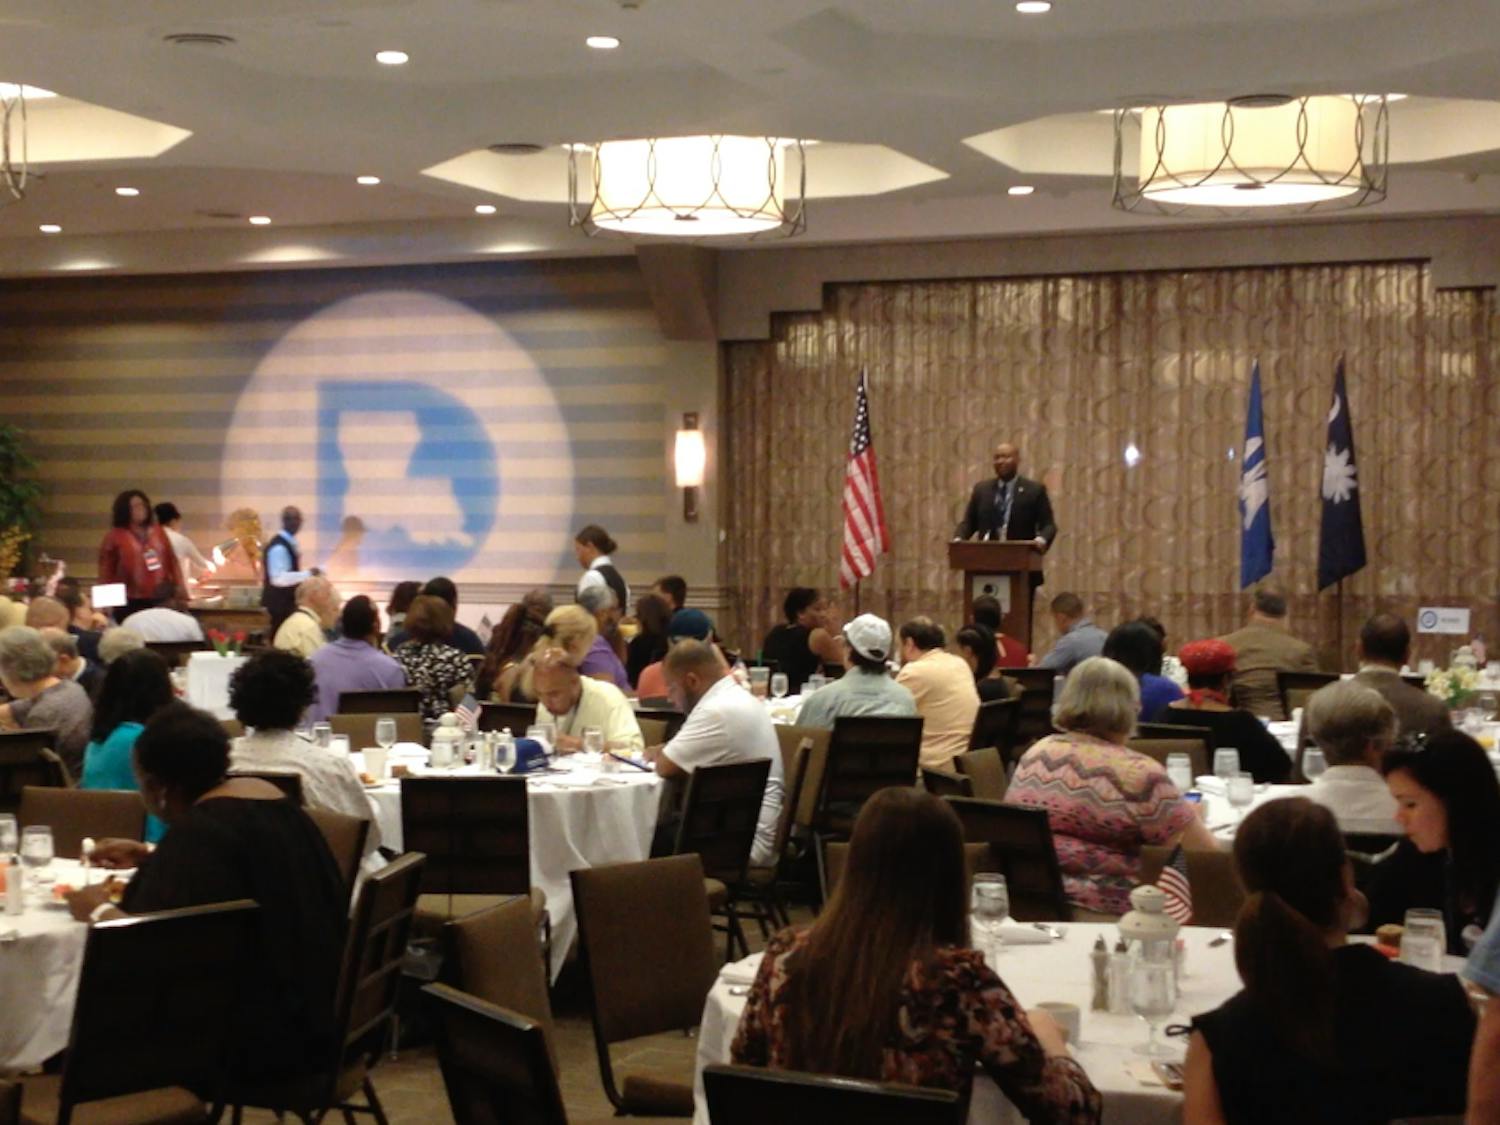 South Carolina Democratic Party Chairman Jaime Harrison speaks to the South Carolina and Louisiana delegations at a joint breakfast at the Democratic National Convention in Philadelphia on July 26, 2016.